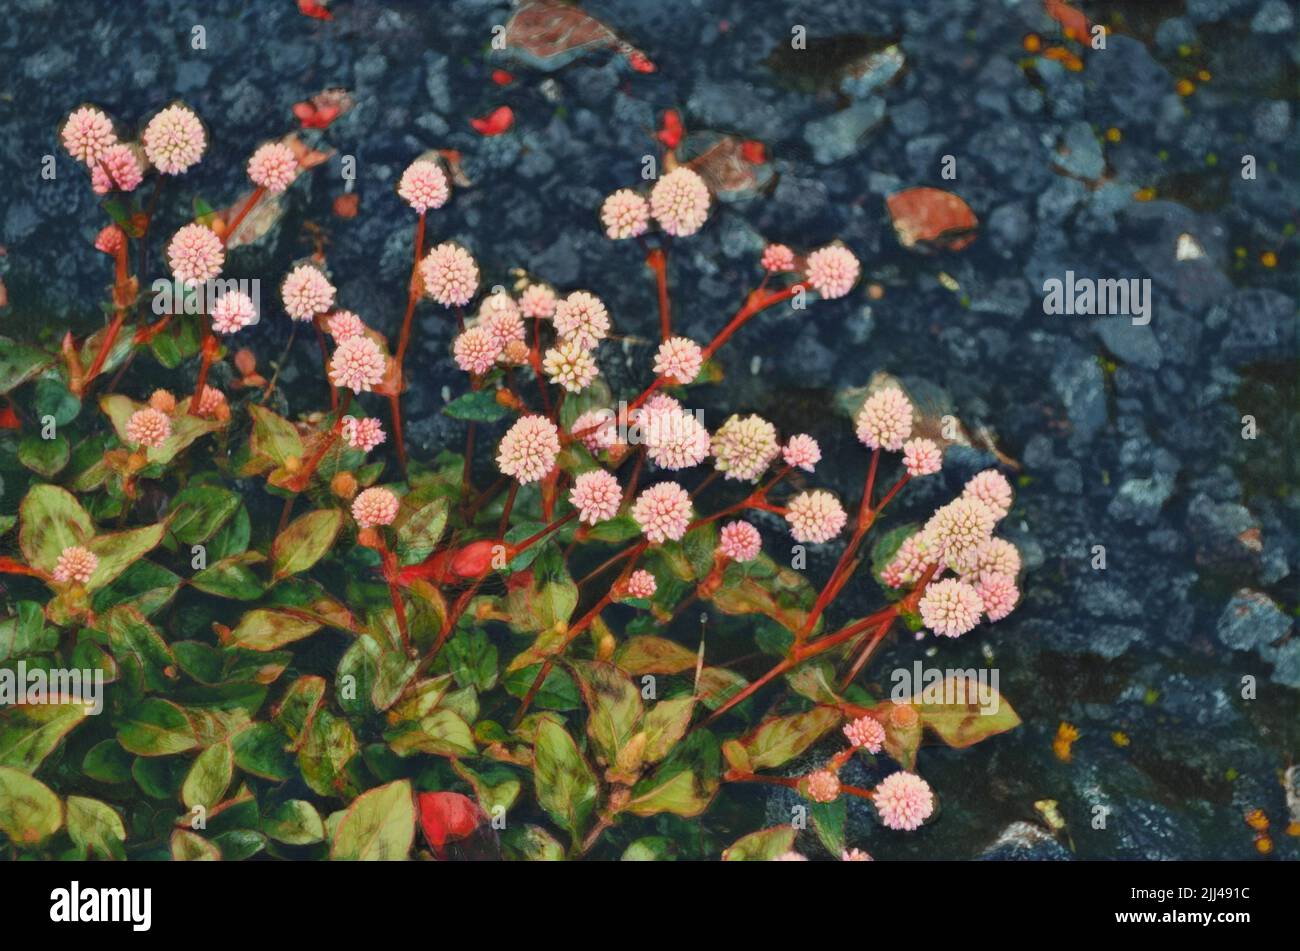 Pink flower with red stems and green leaves growing next to gravel.  Edited to look like a painting. Stock Photo